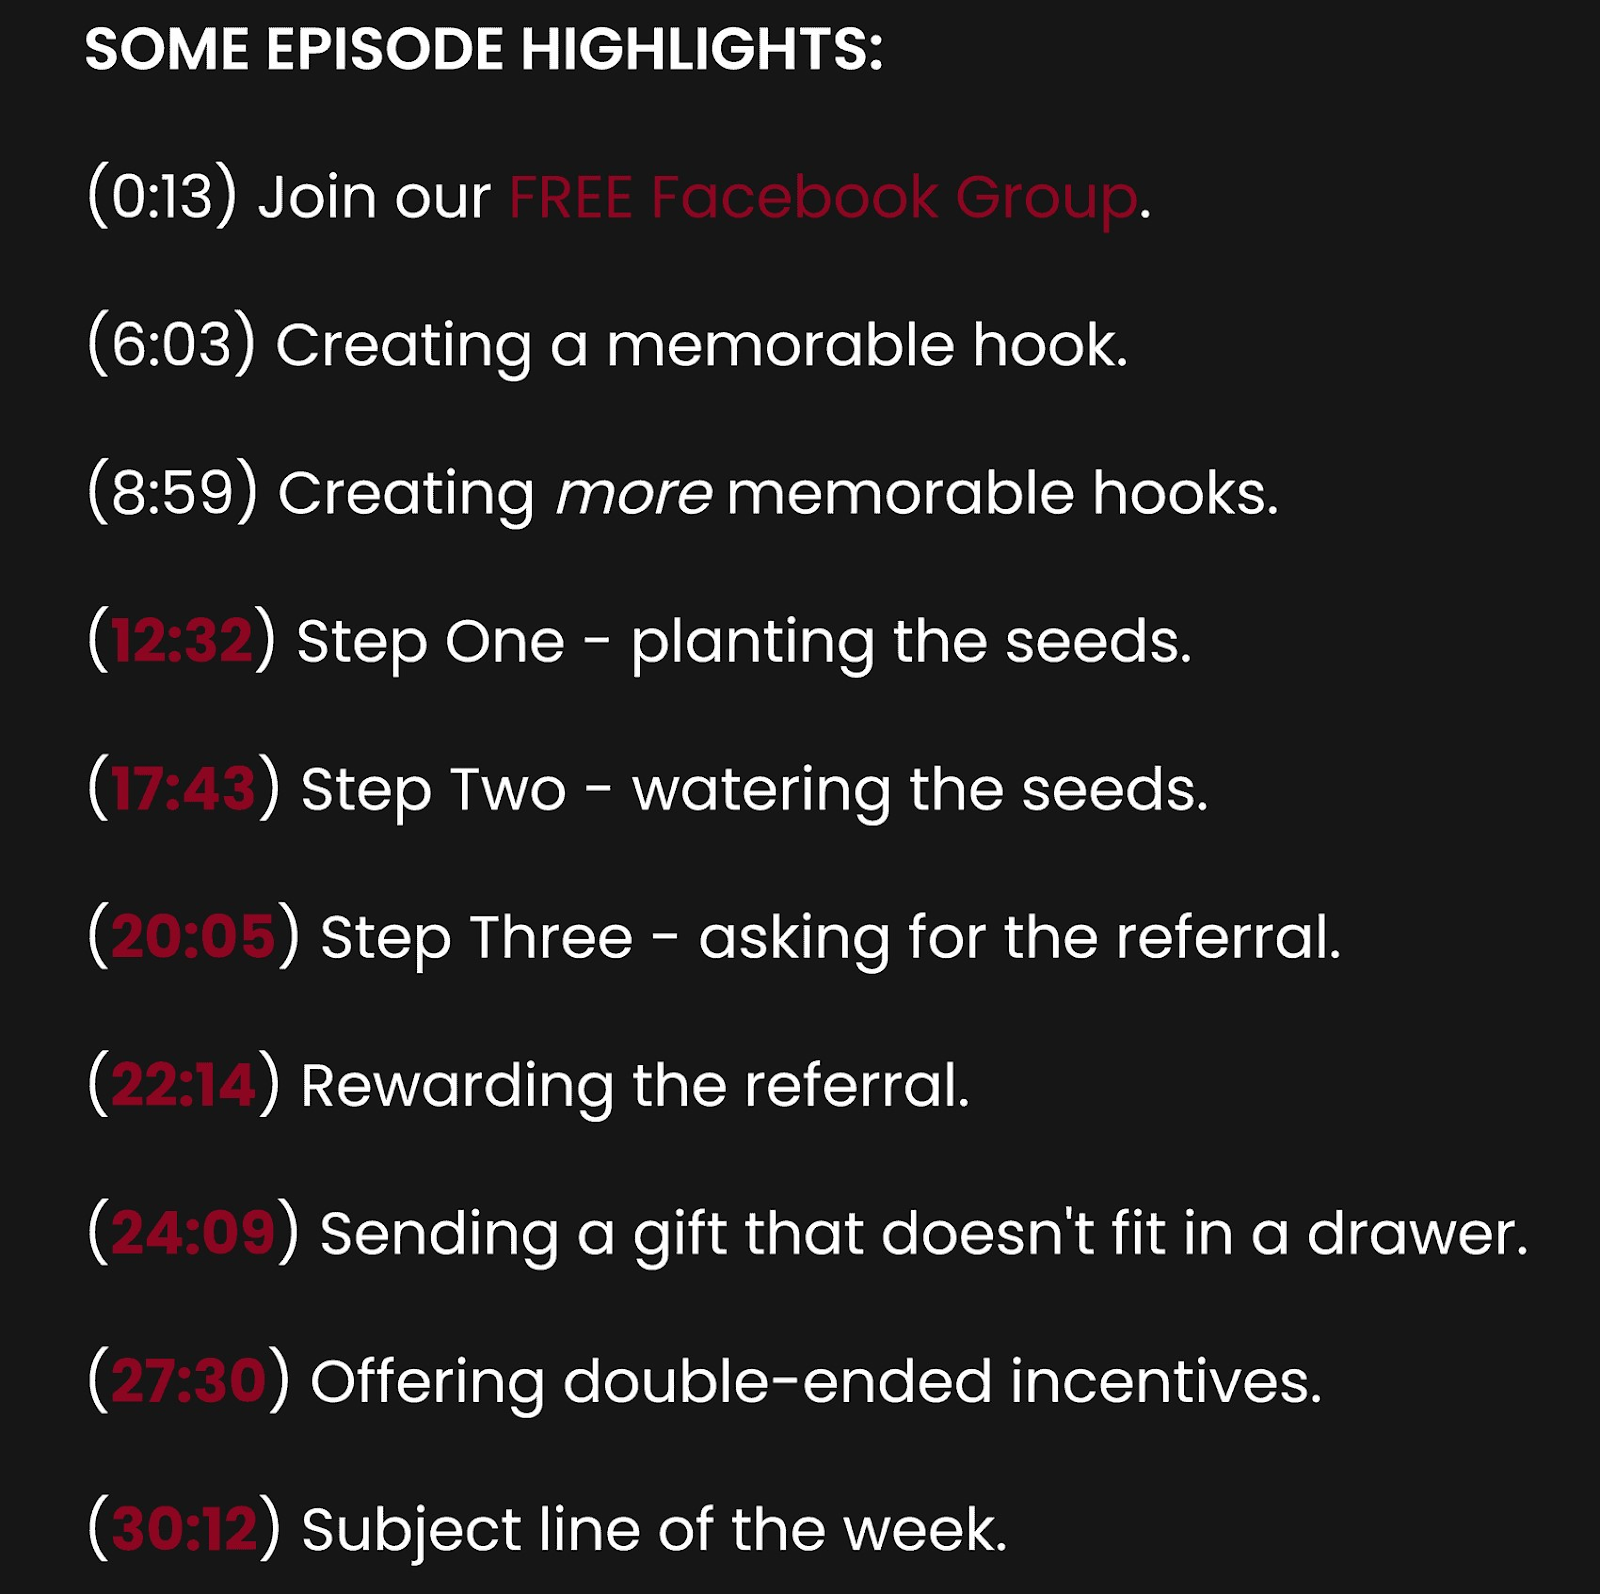 Episode highlights section by The Email Marketing Show